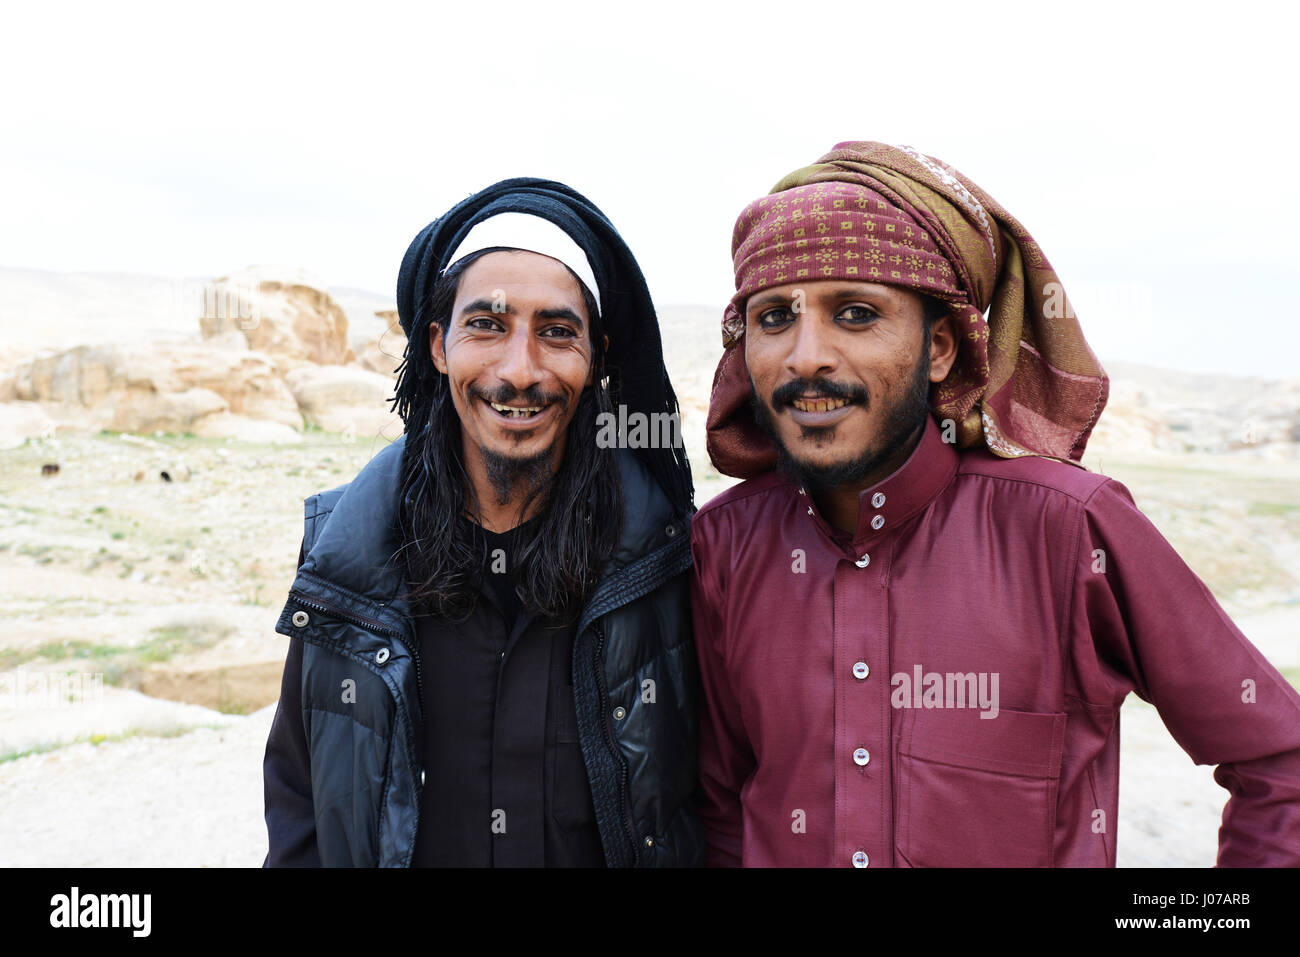 Young Bedouin men wearing a traditional eyeliner called Kohel. Stock Photo